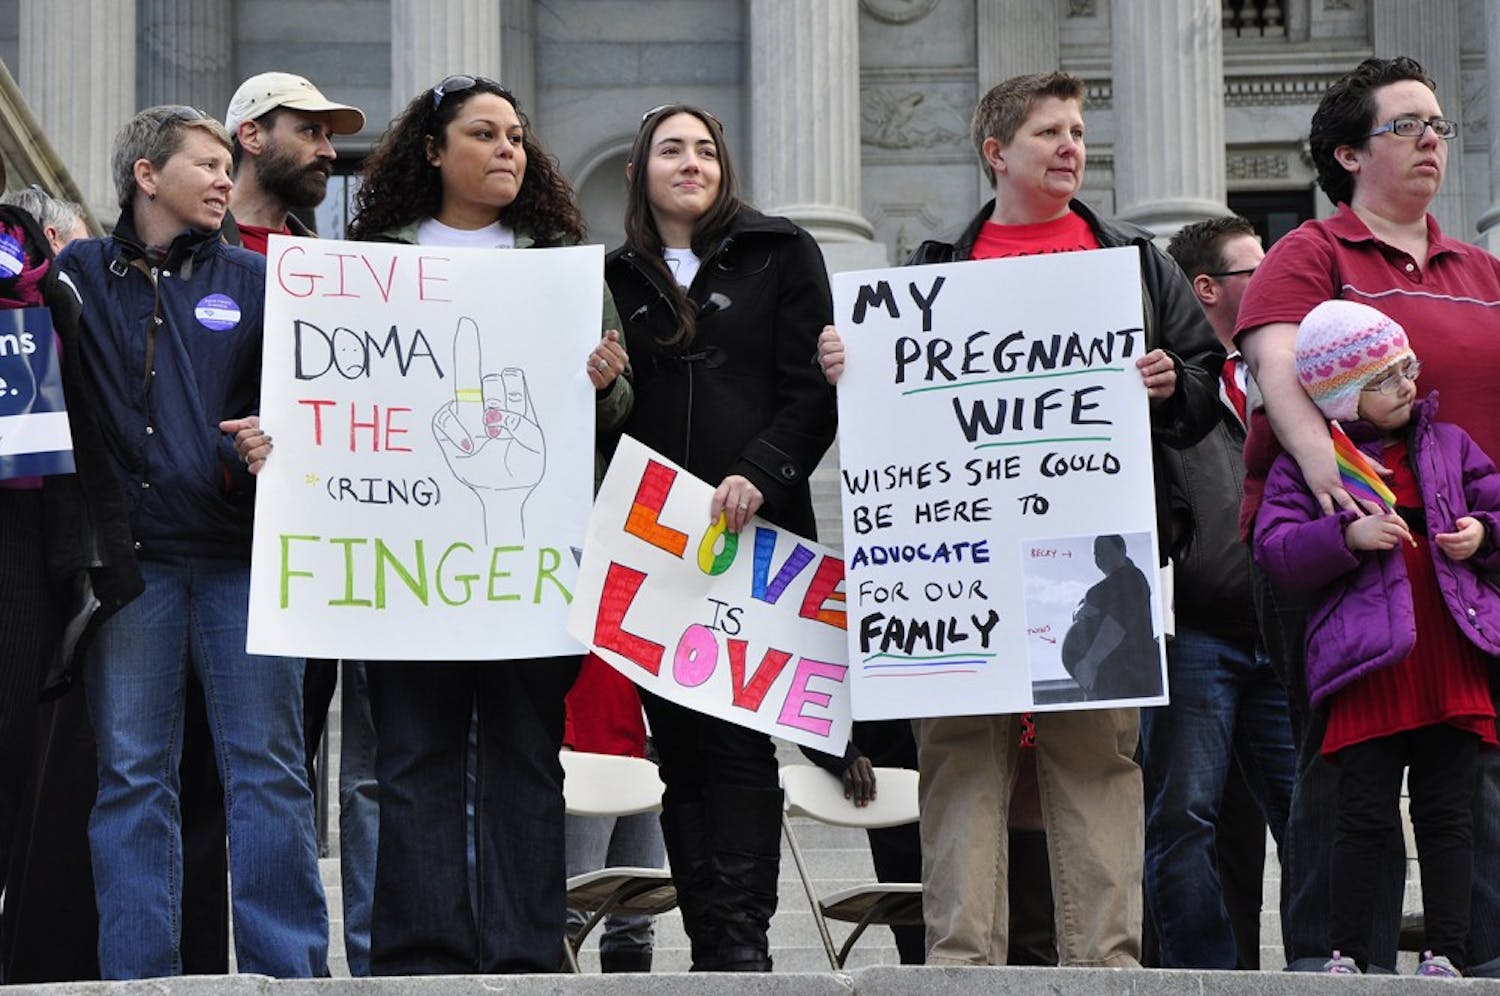 Those who had been affected by the Defense of Marriage Act were asked to come forward and stand on the Statehouse steps at Tuesday's rally.